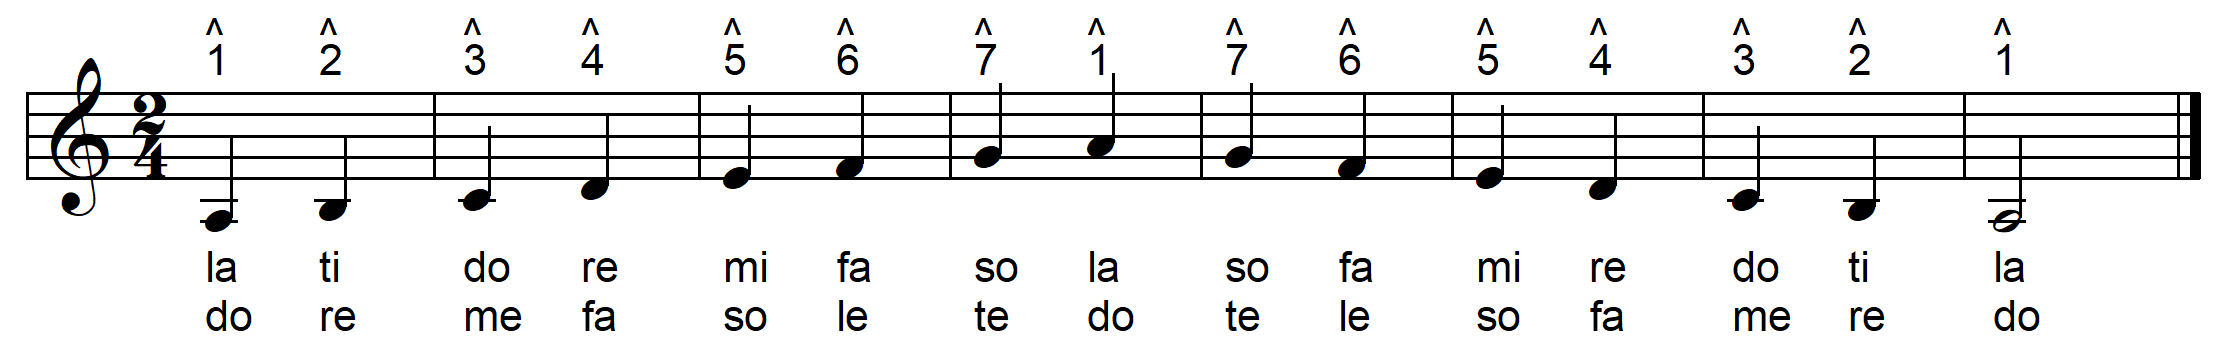 natural minor scale with solfege and scale degree numbers